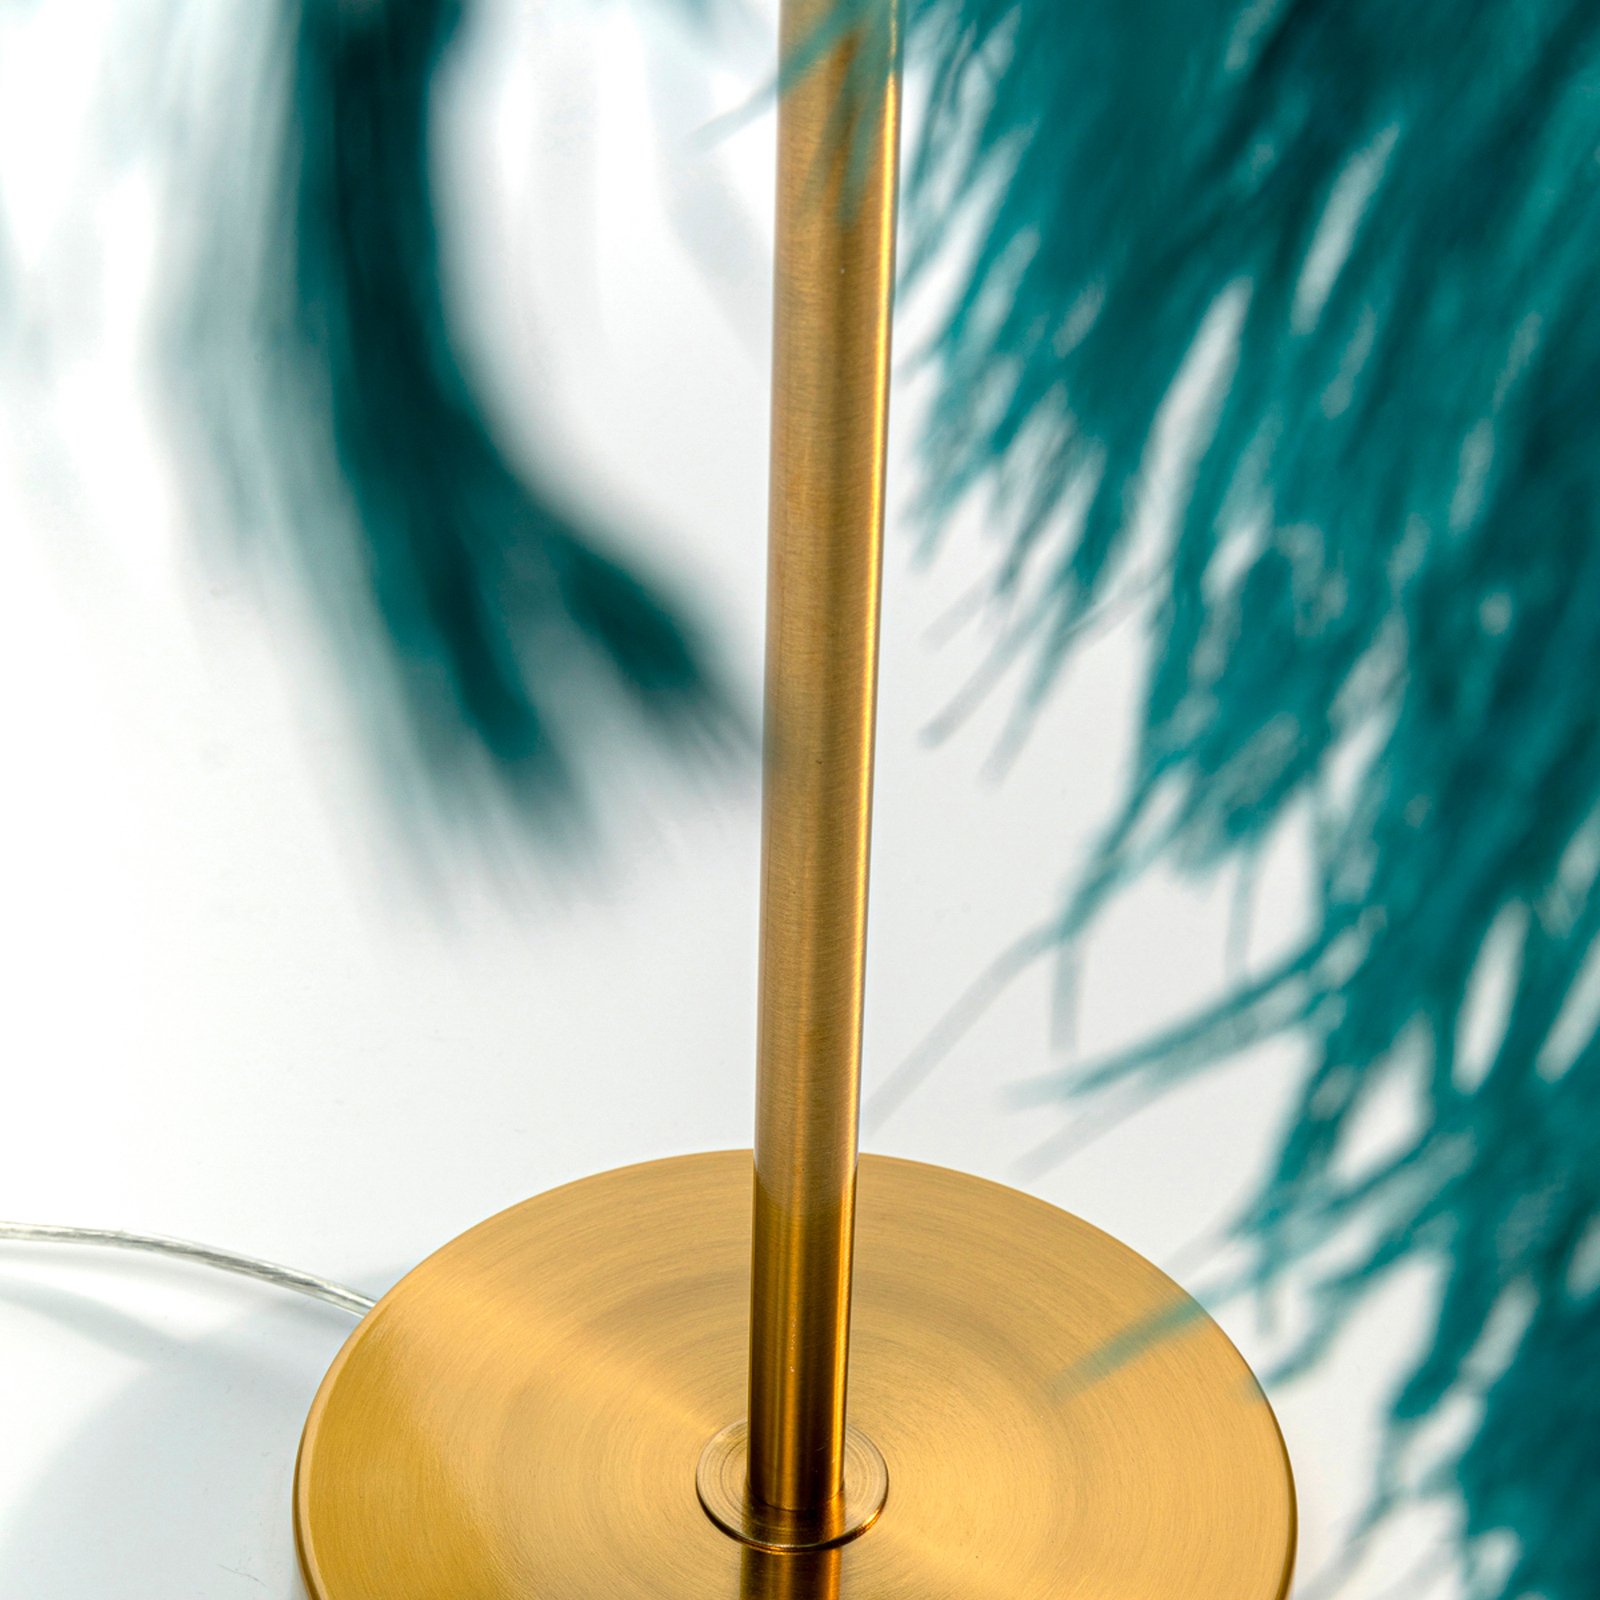 KARE Feather Palm table lamp with feathers, green